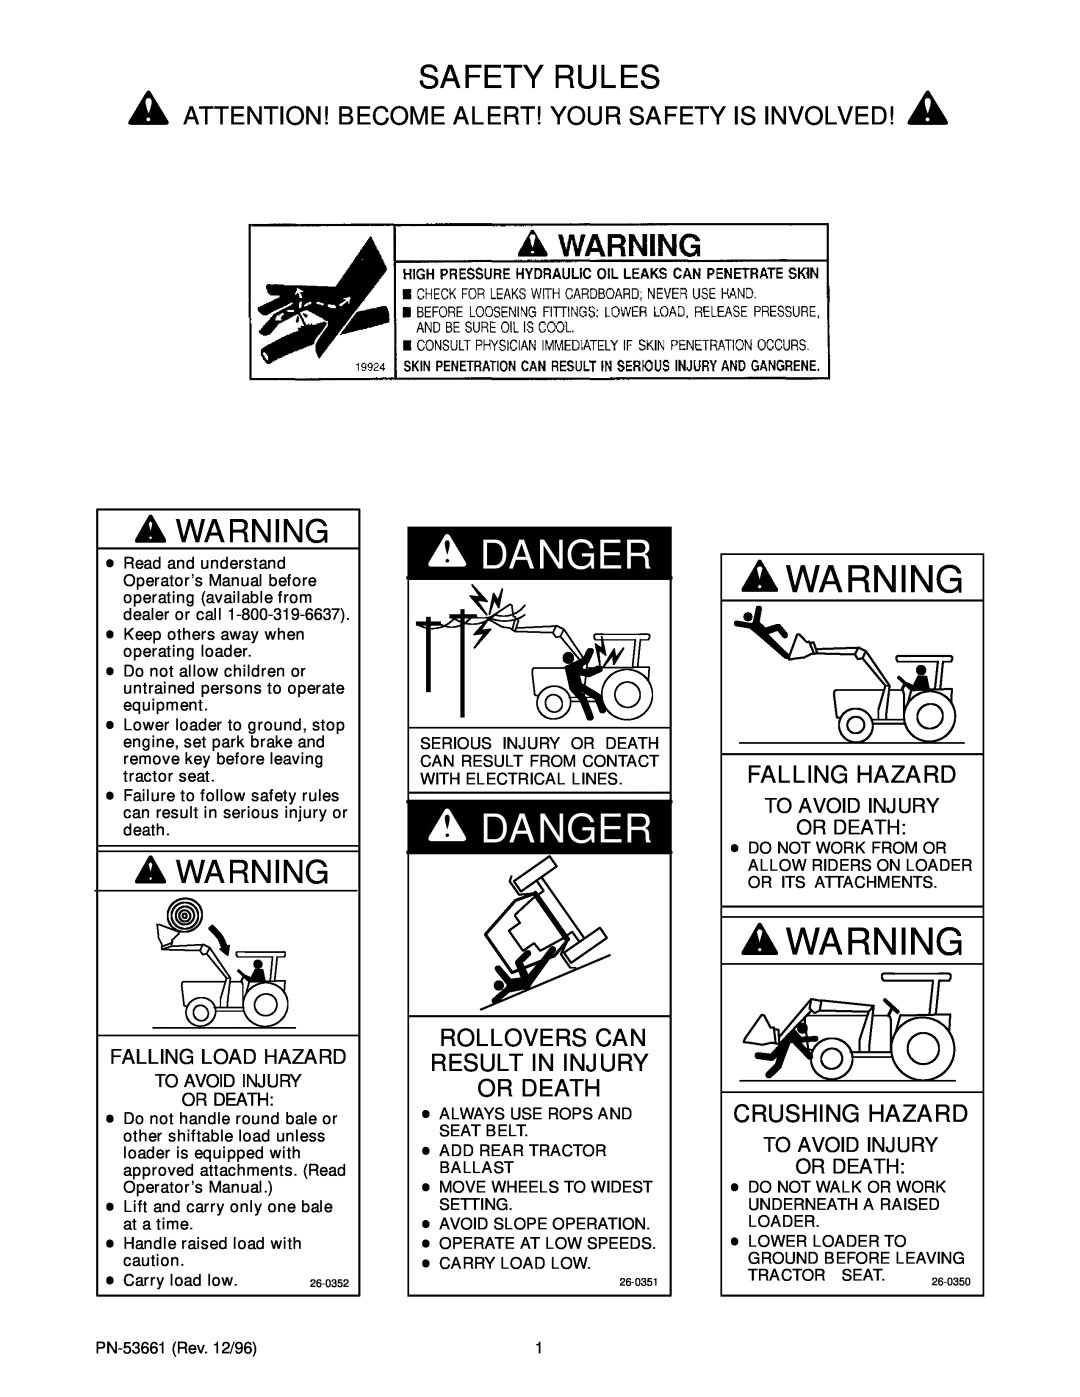 Woods Equipment 111307 Safety Rules, Attention! Become Alert! Your Safety Is Involved, Danger, Falling Hazard, Or Death 